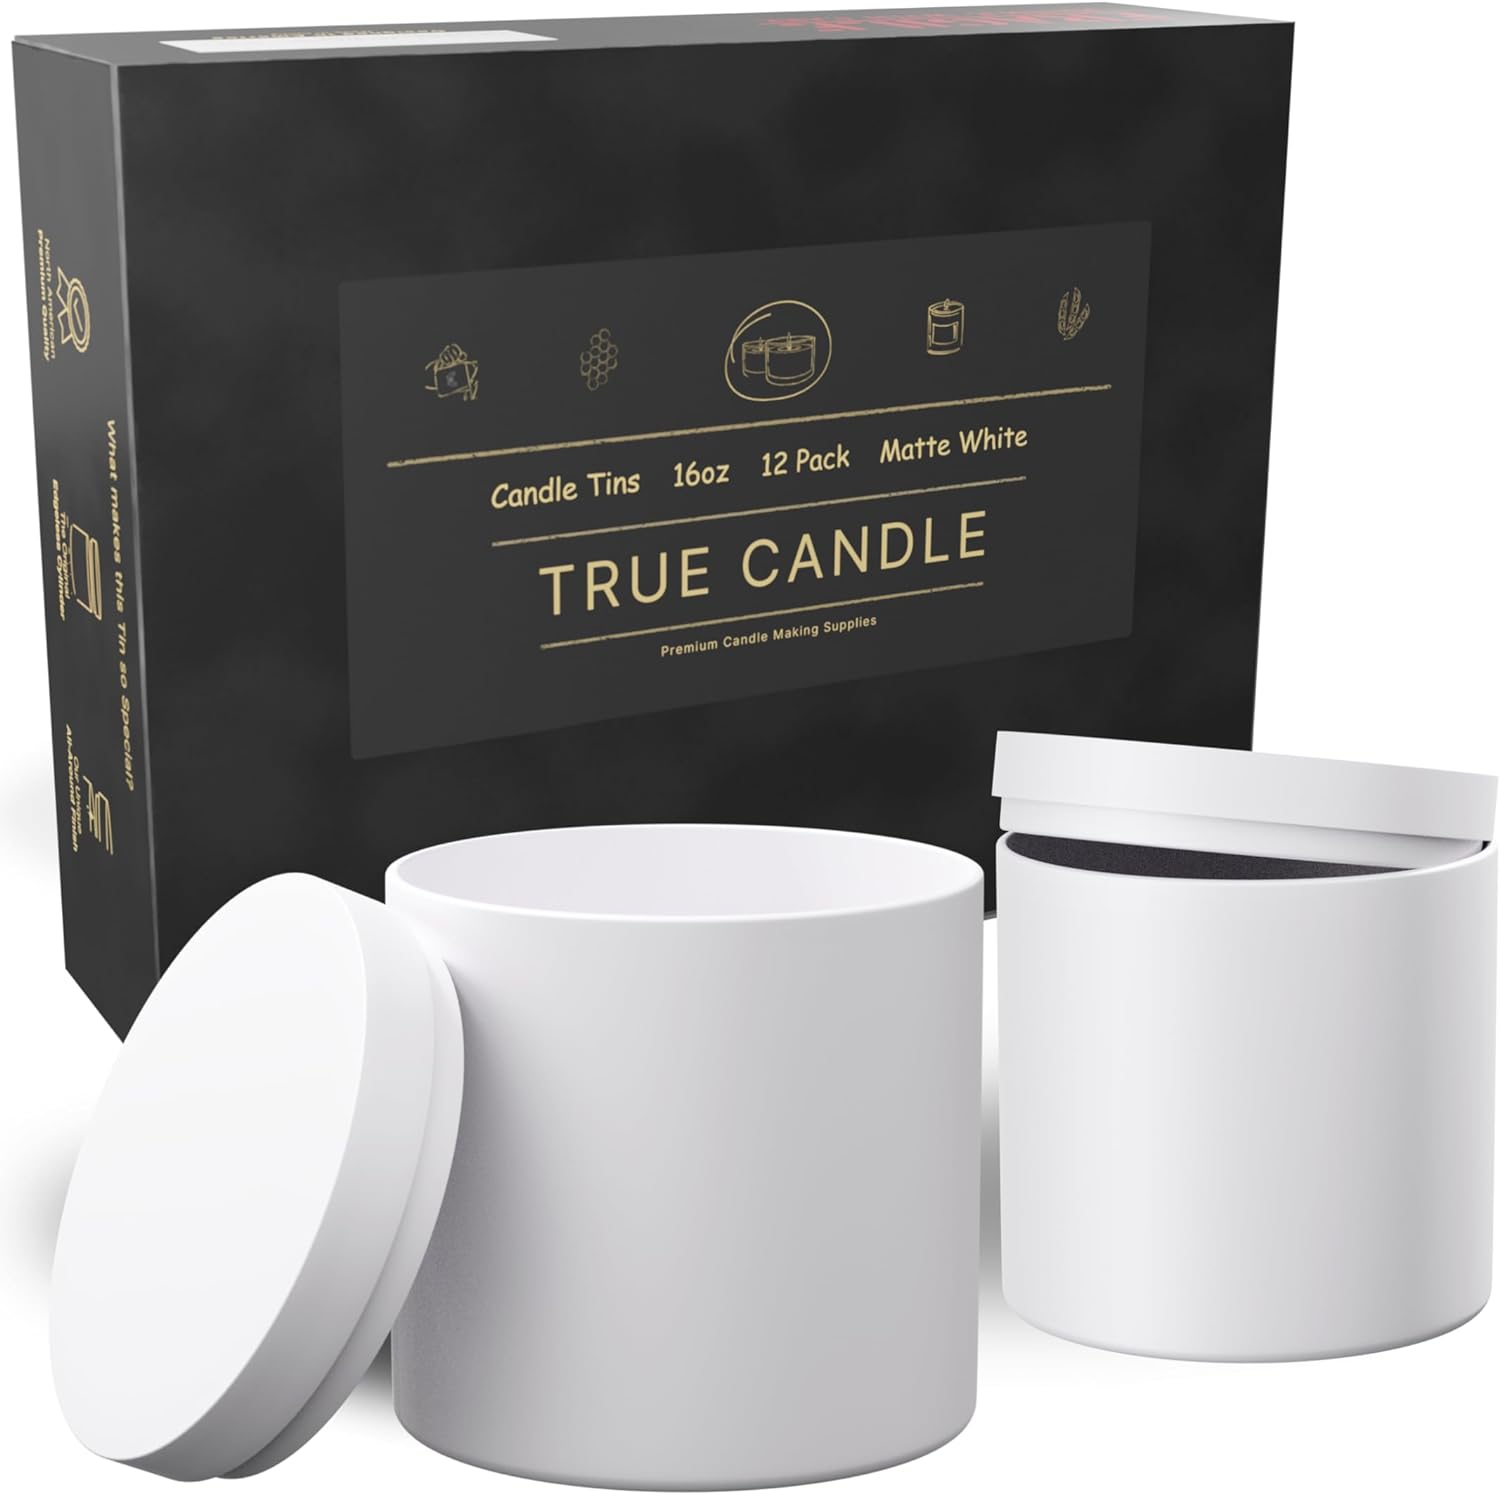 True Candle 24-pack 4oz Matte White Candle Tins Edgeless